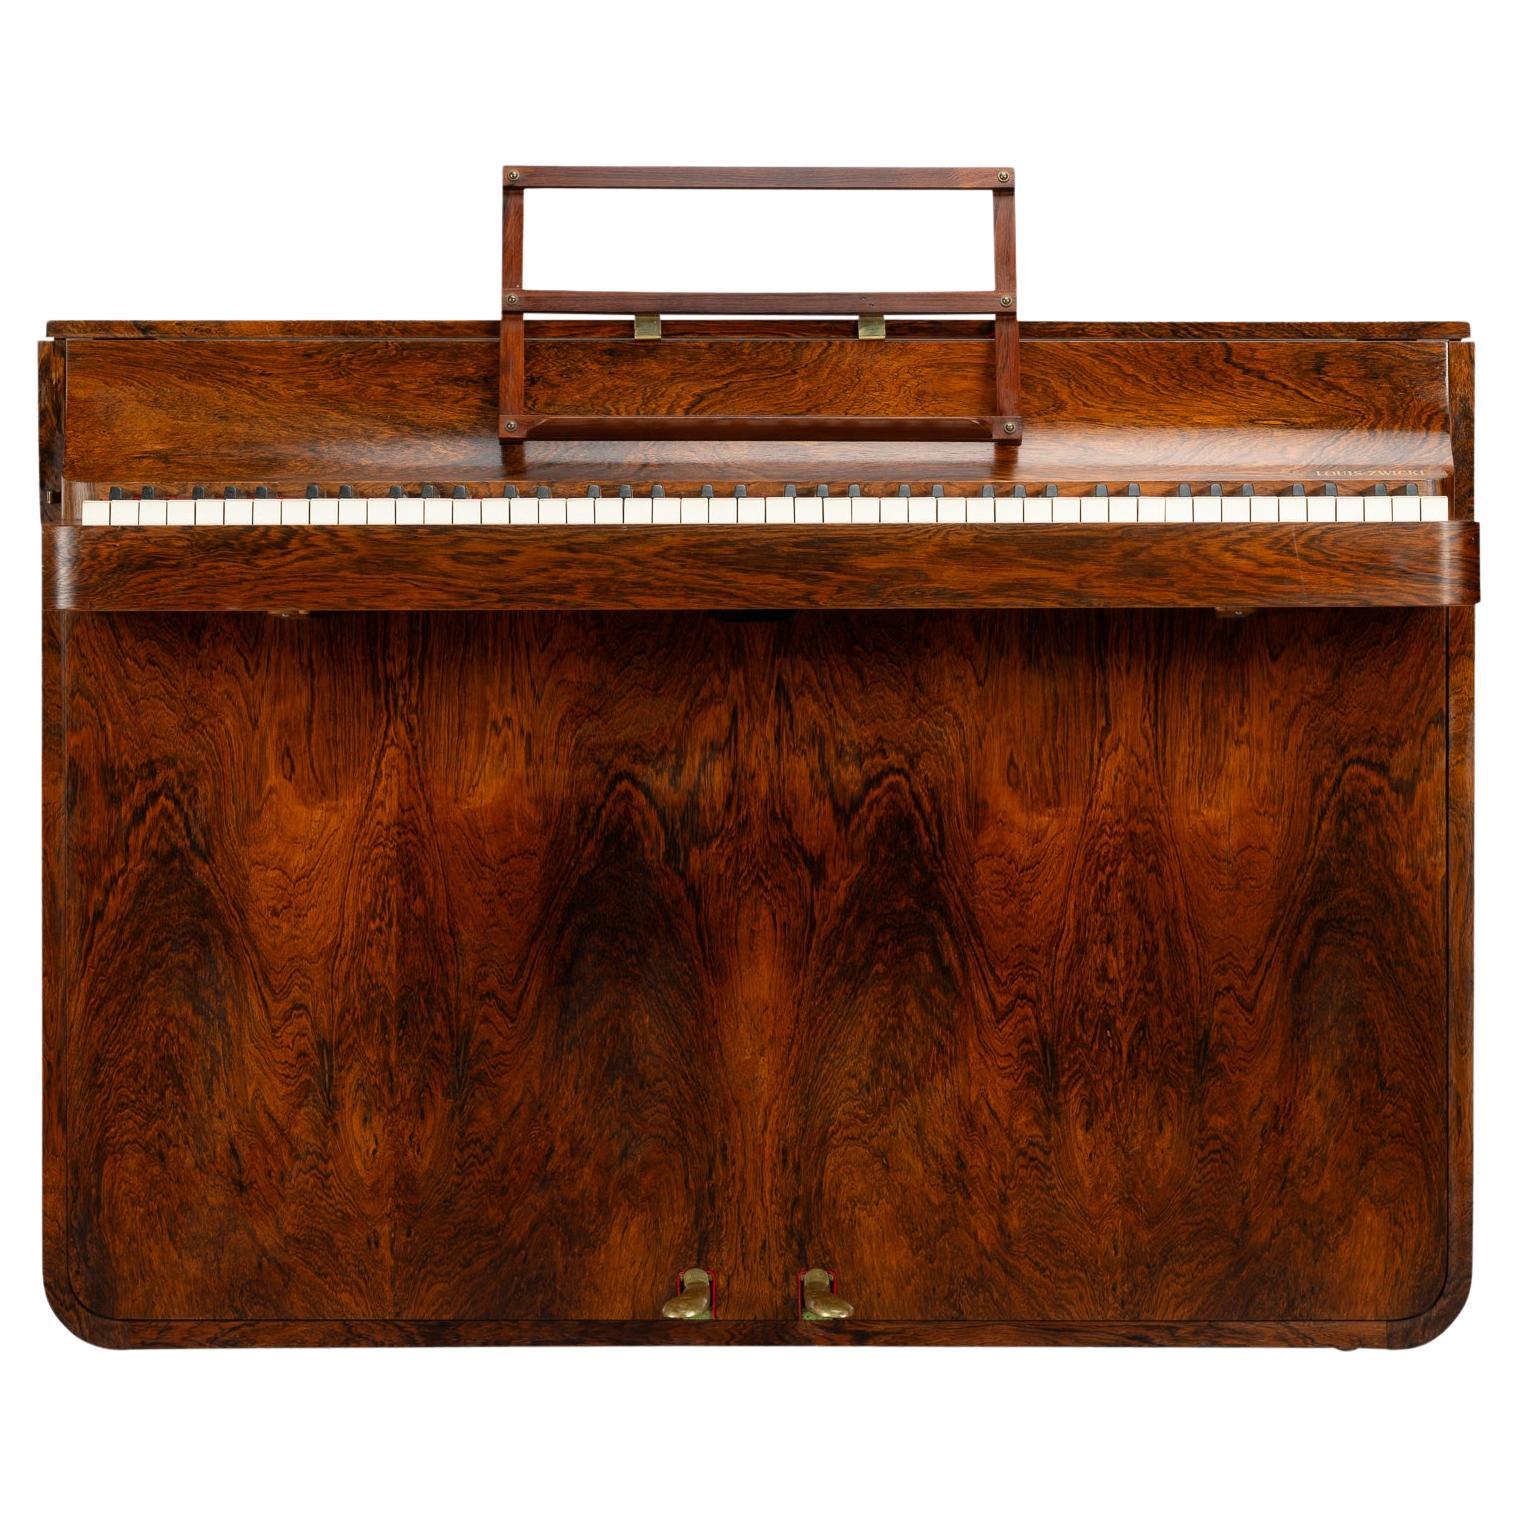 Danish Design Midcentury Rosewood Pianette by Louis Zwicki, 1950s For Sale